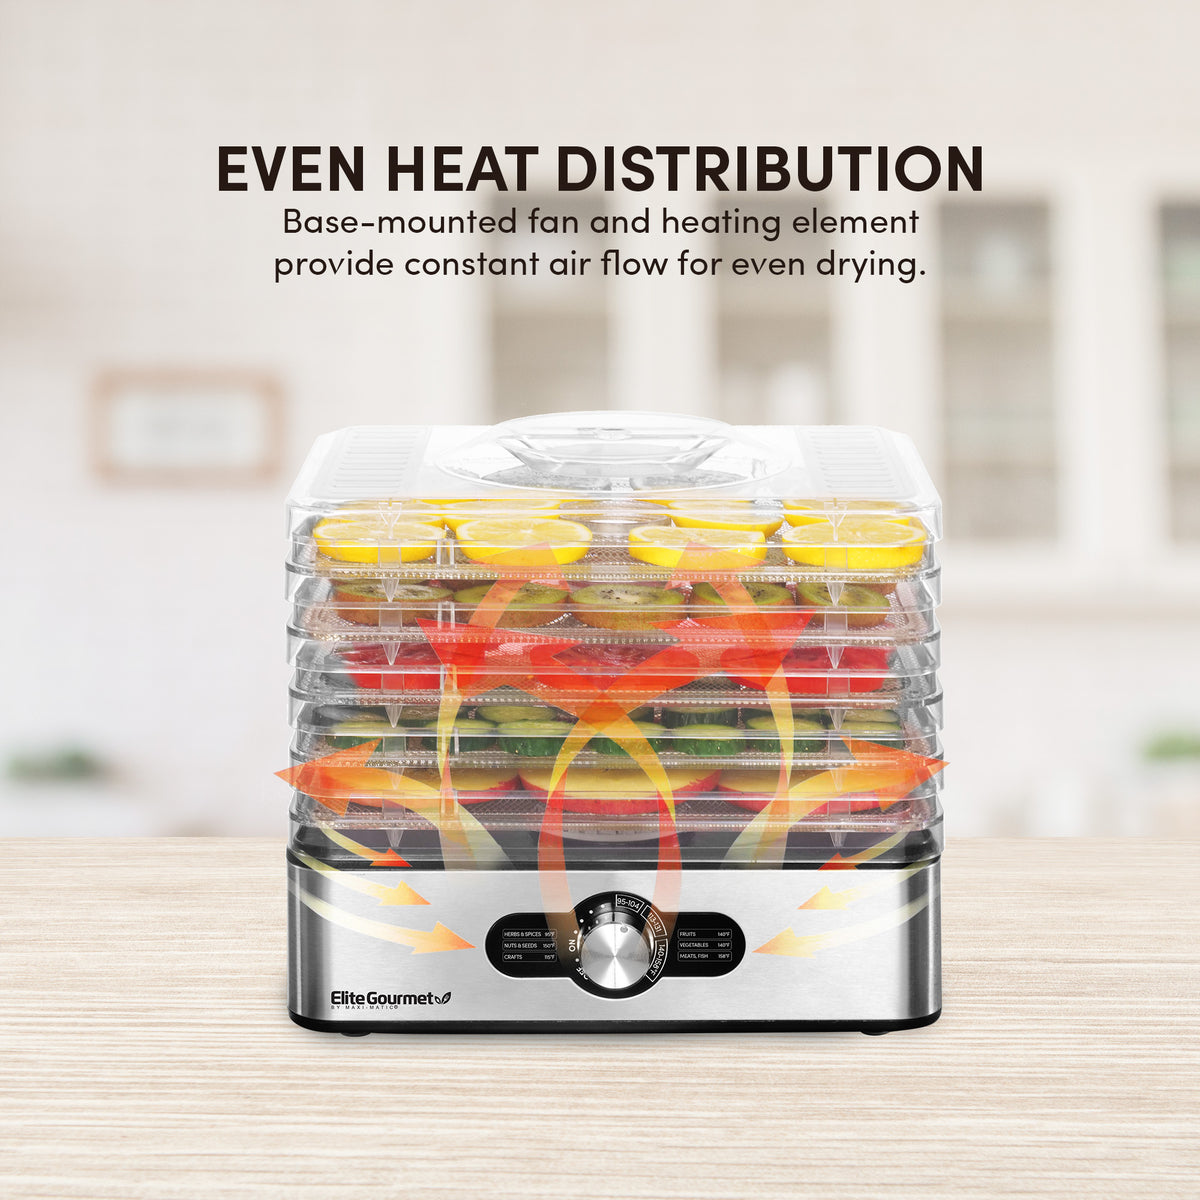 Raw Rutes Square Rutes 5 Tray Stainless Steel Dehydrator